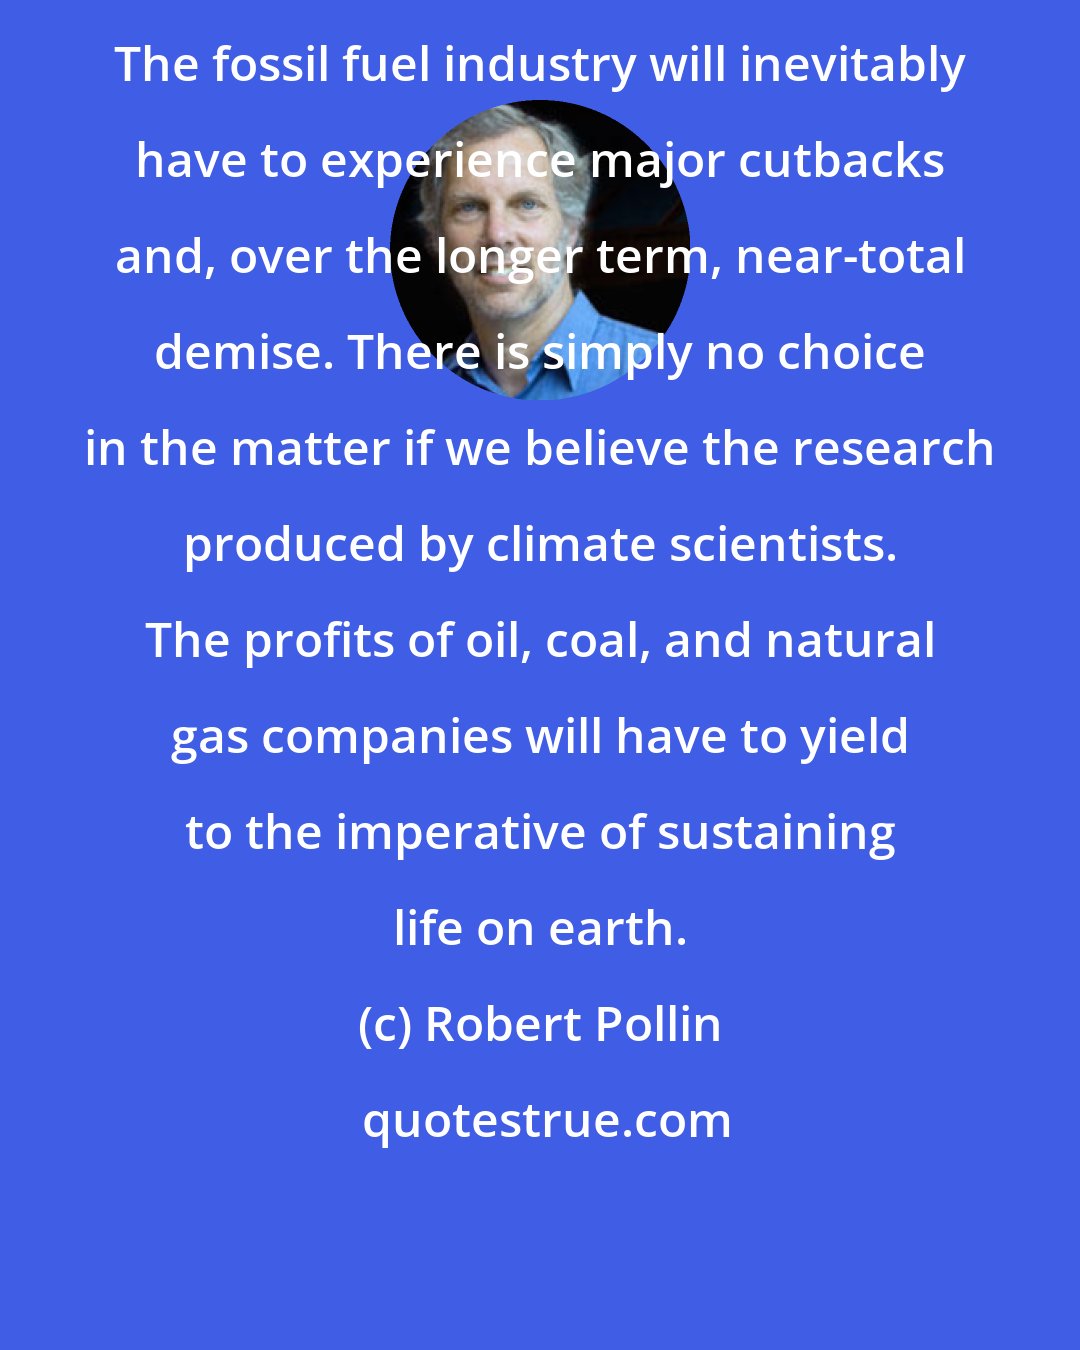 Robert Pollin: The fossil fuel industry will inevitably have to experience major cutbacks and, over the longer term, near-total demise. There is simply no choice in the matter if we believe the research produced by climate scientists. The profits of oil, coal, and natural gas companies will have to yield to the imperative of sustaining life on earth.